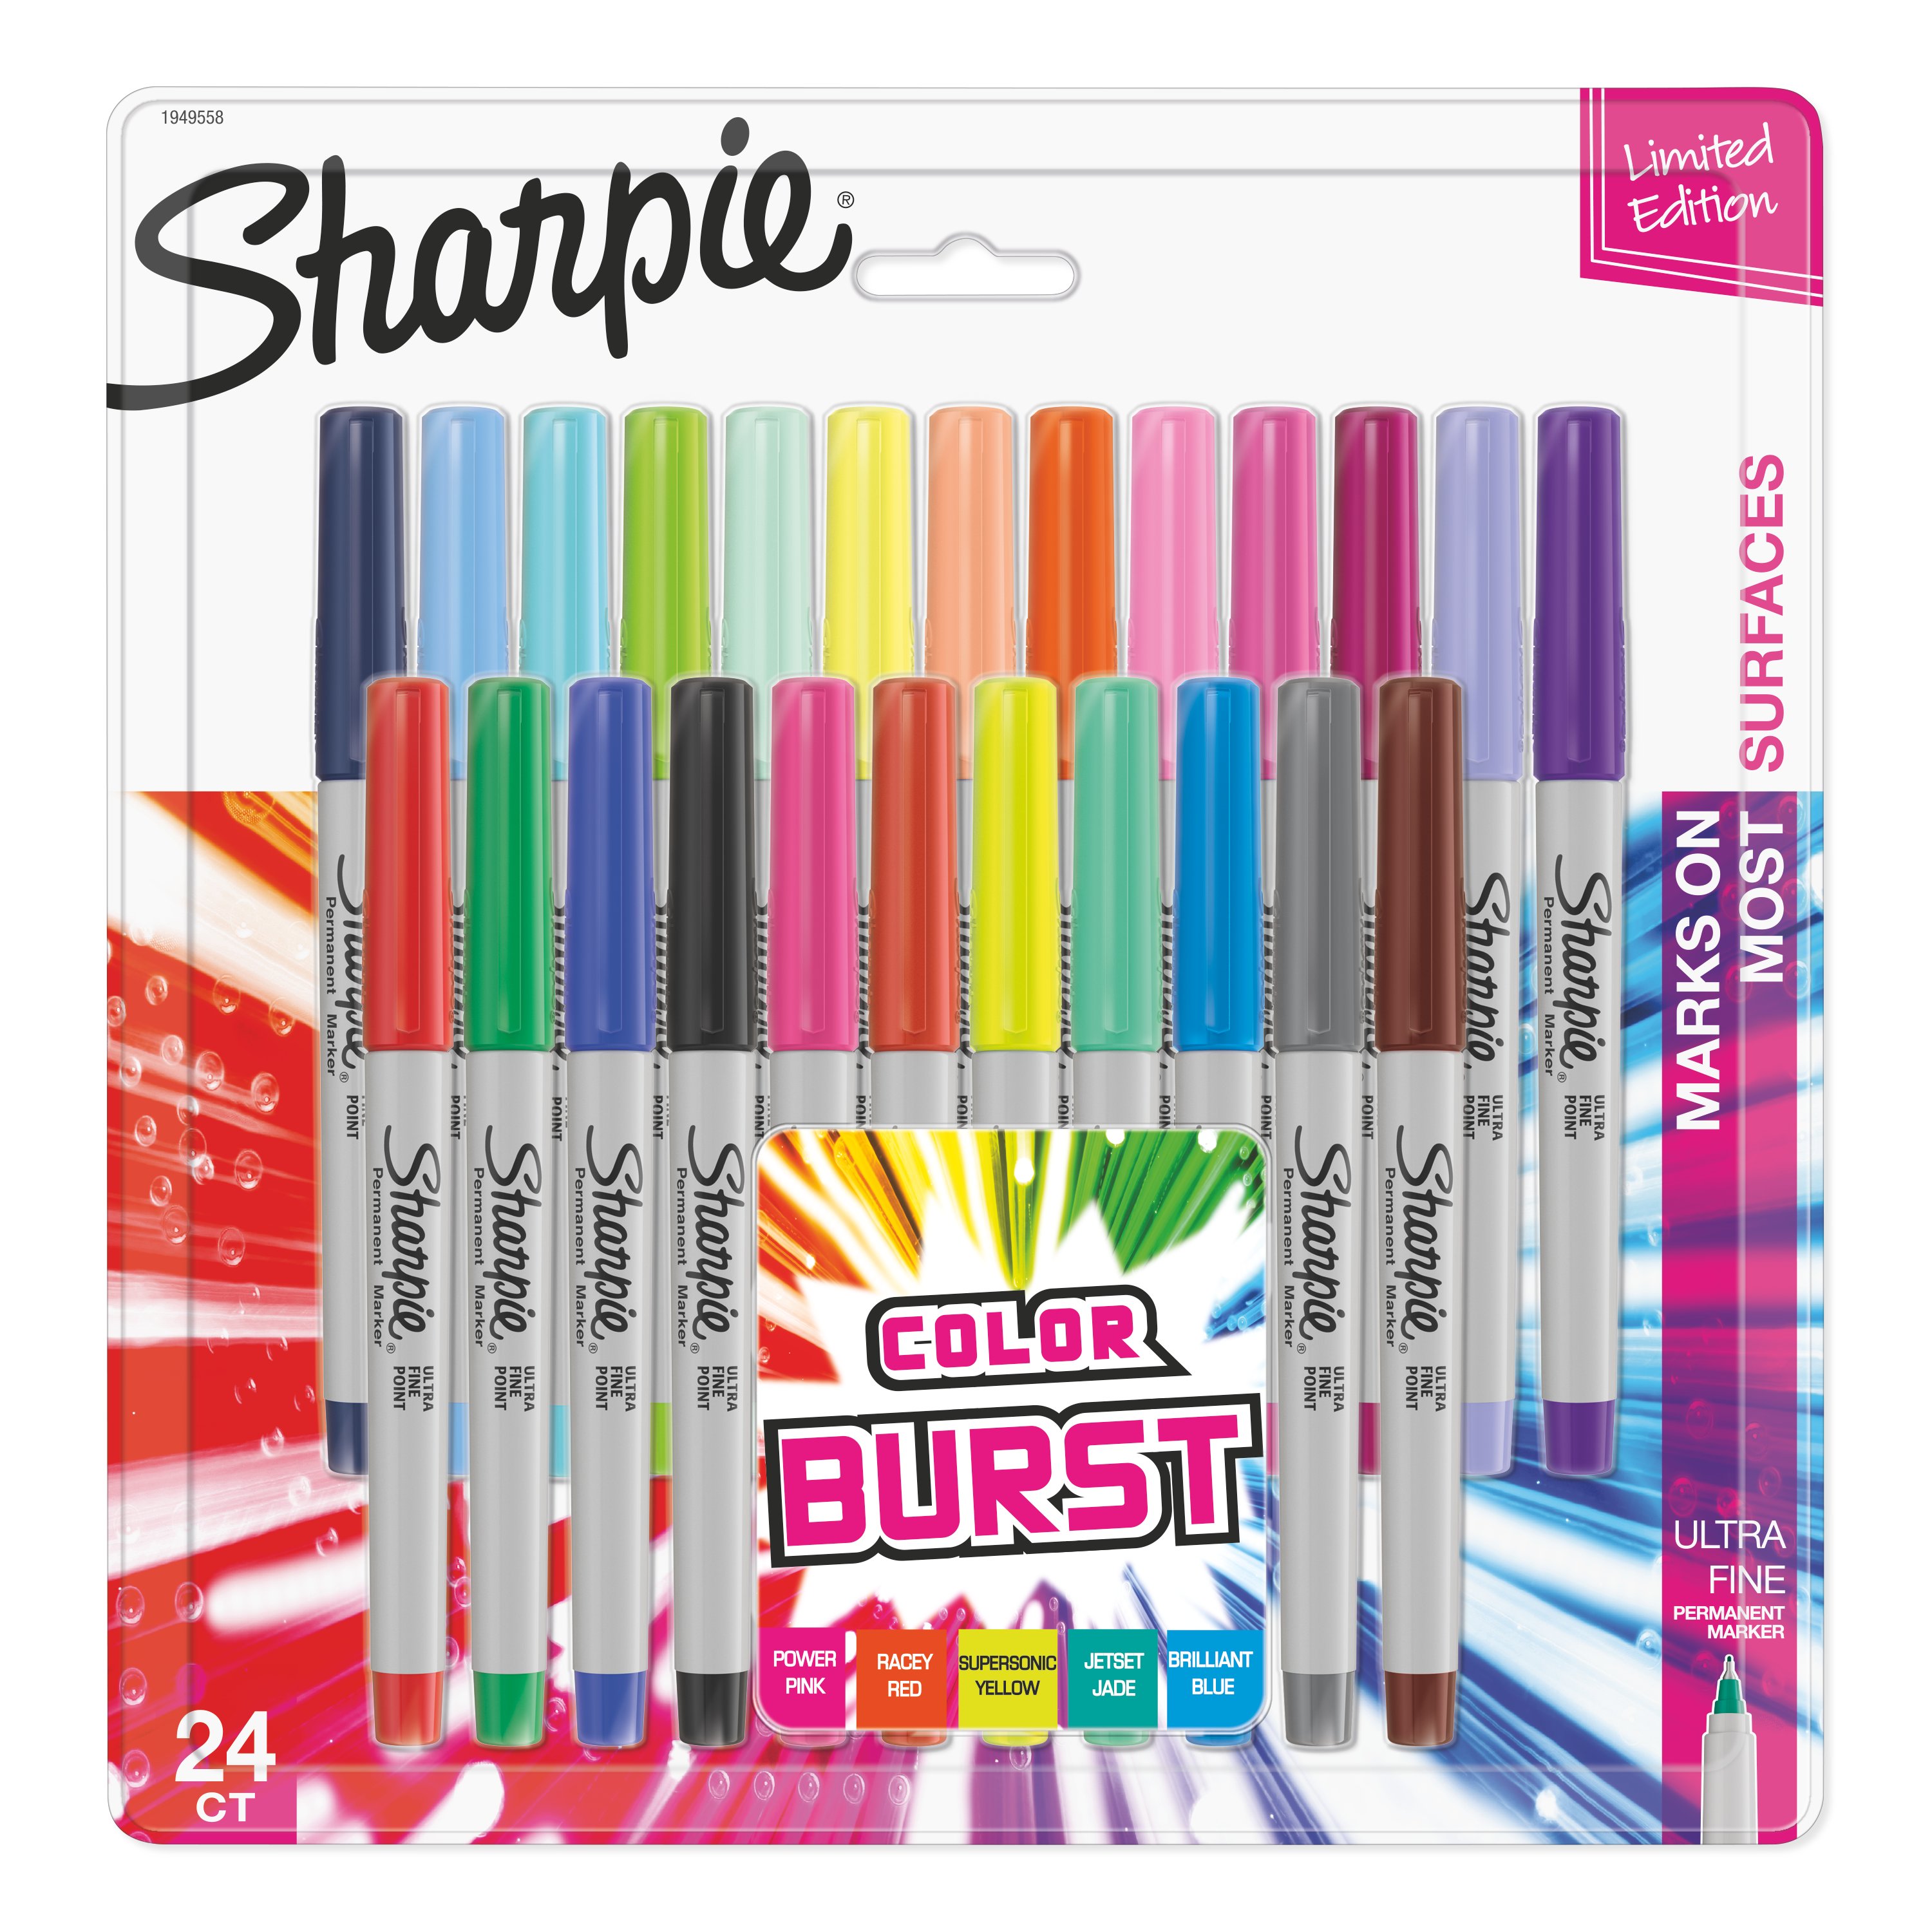 https://s7d9.scene7.com/is/image/NewellRubbermaid/1949558-wace-sharpie-ultra-fine-assorted-color-burst-24ct-in-pack-1-1